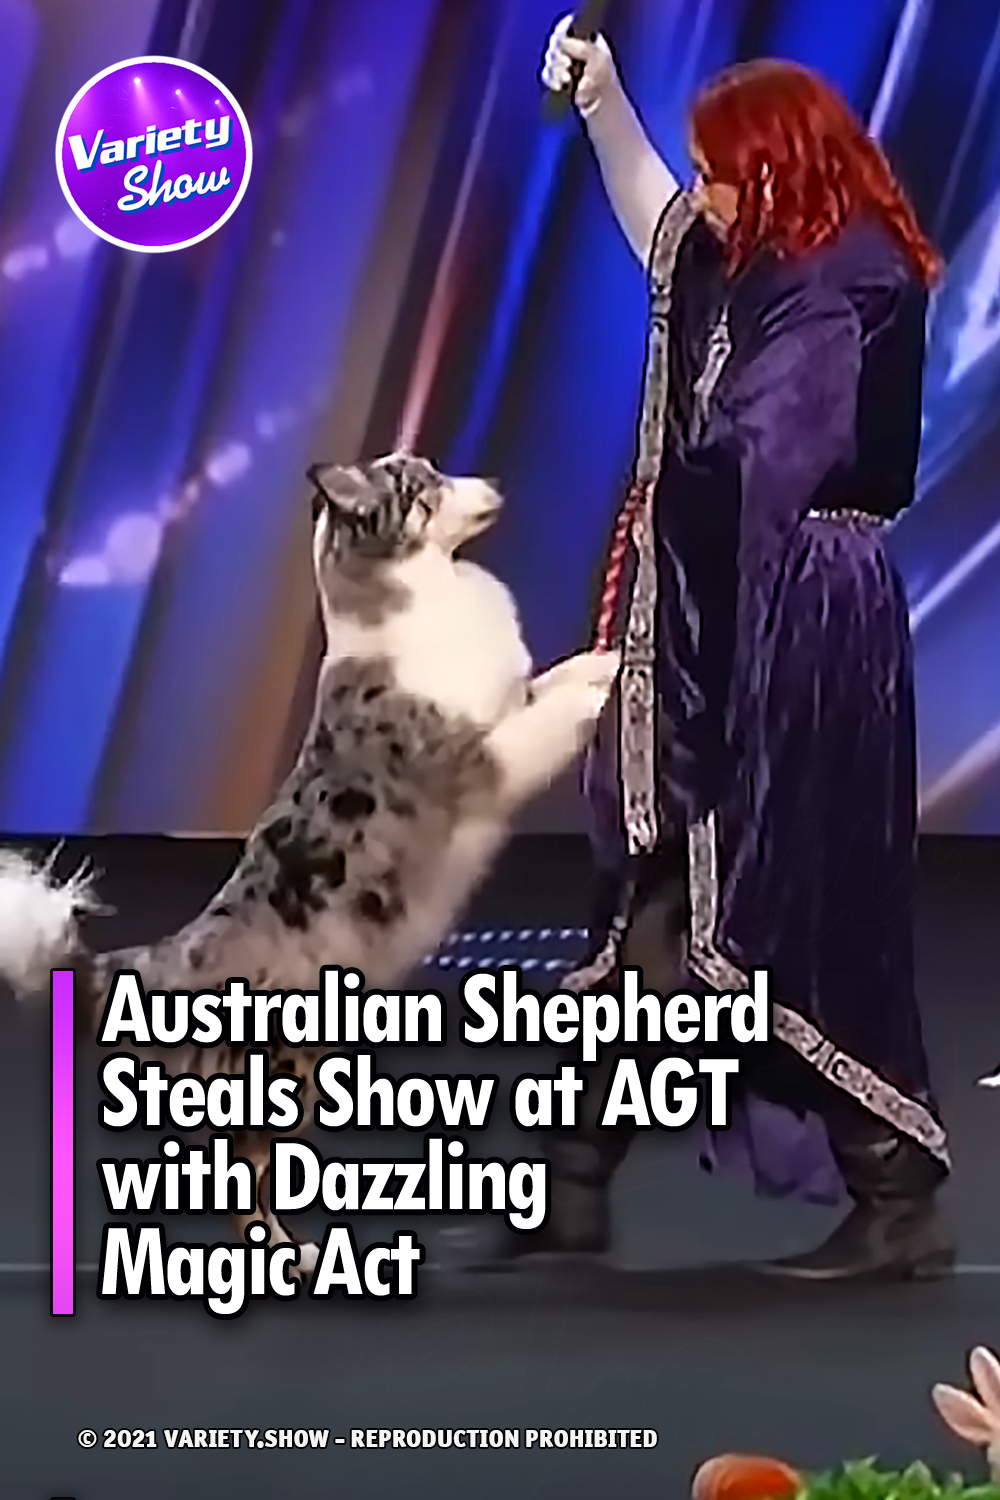 Australian Shepherd Steals Show at AGT with Dazzling Magic Act